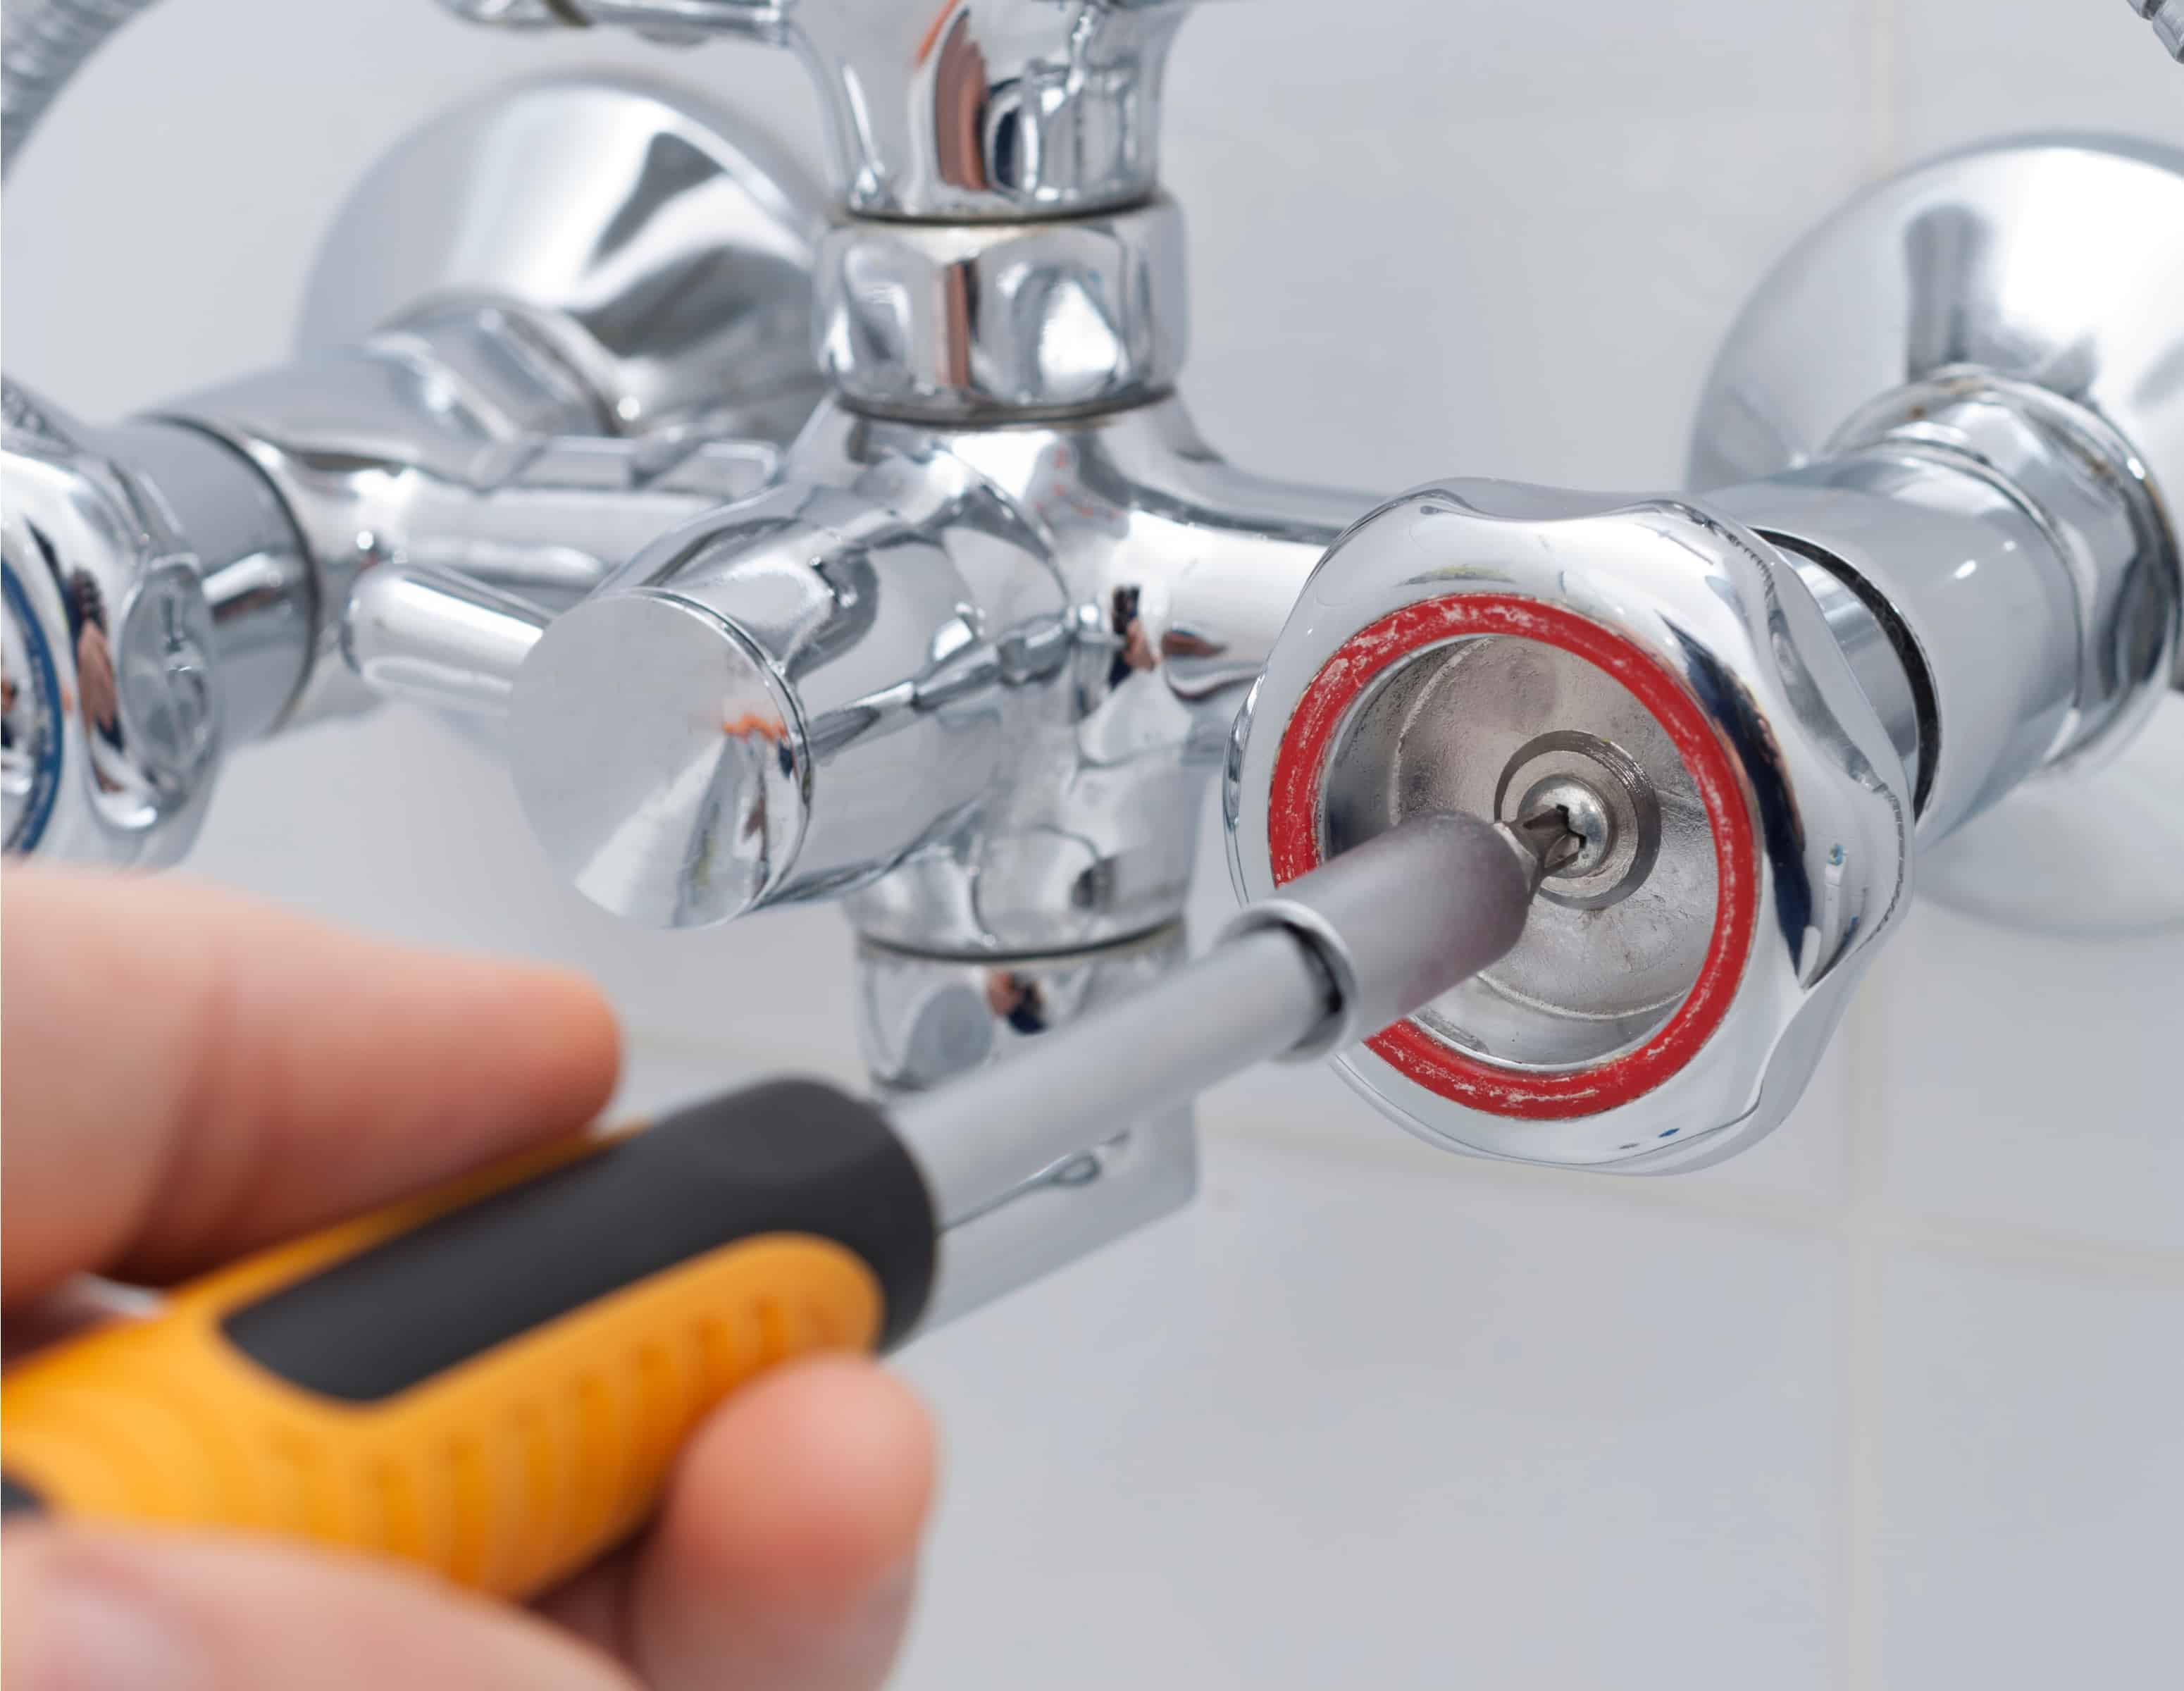 30 Easy Steps To Fix a Leaky Shower Faucet